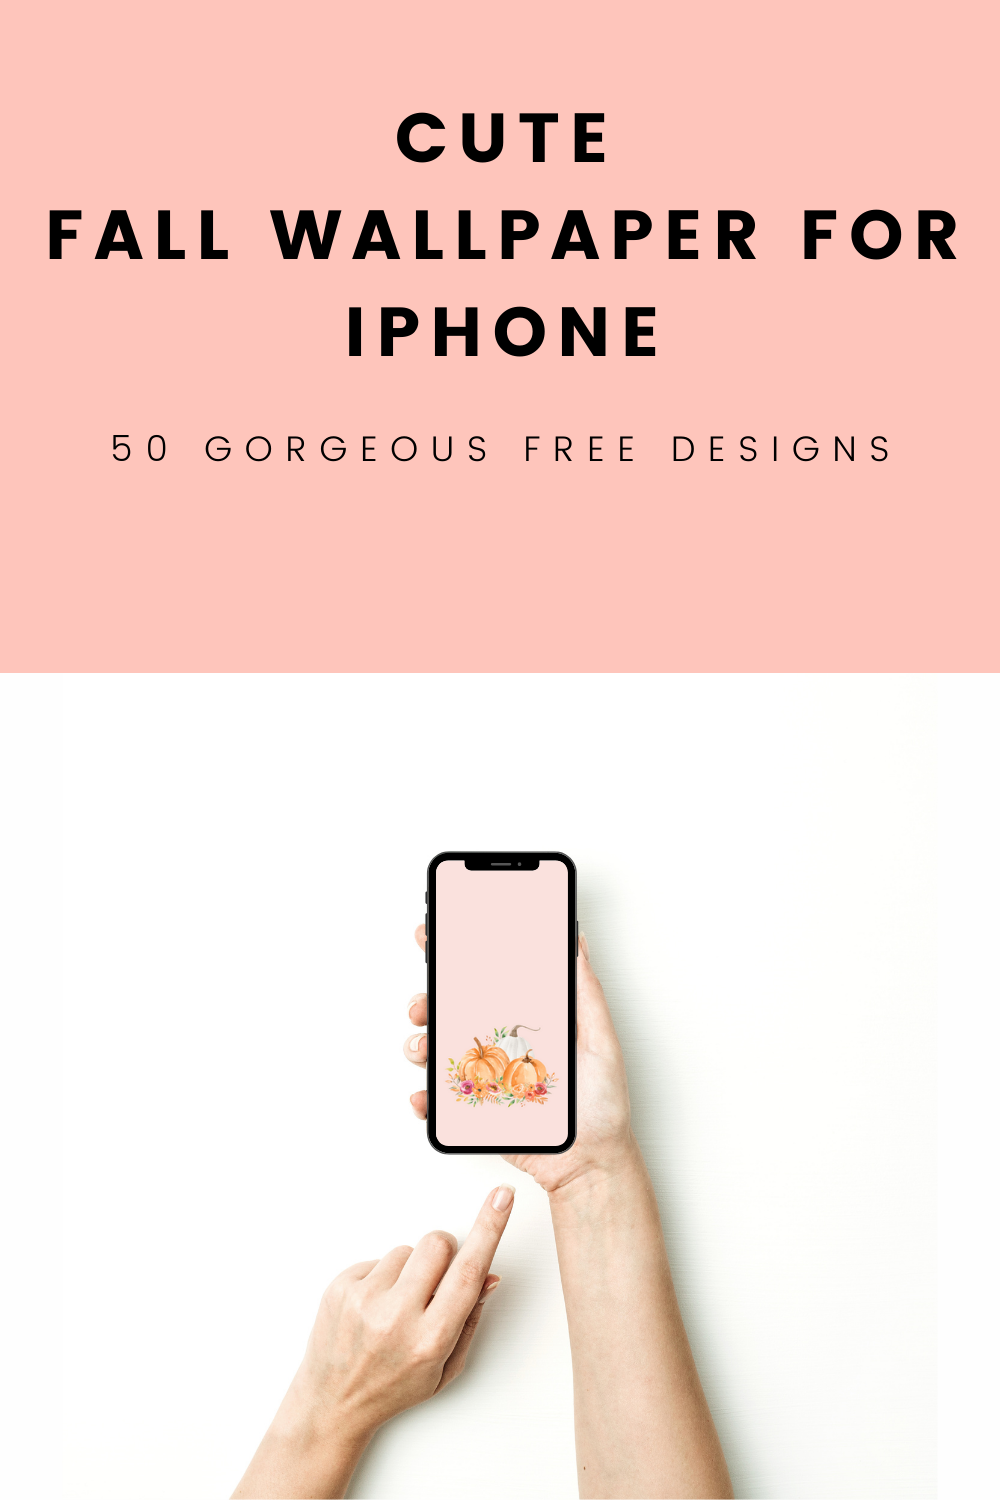 Cute Fall Wallpaper For IPhone: 50 FREE Designs With Instant Download